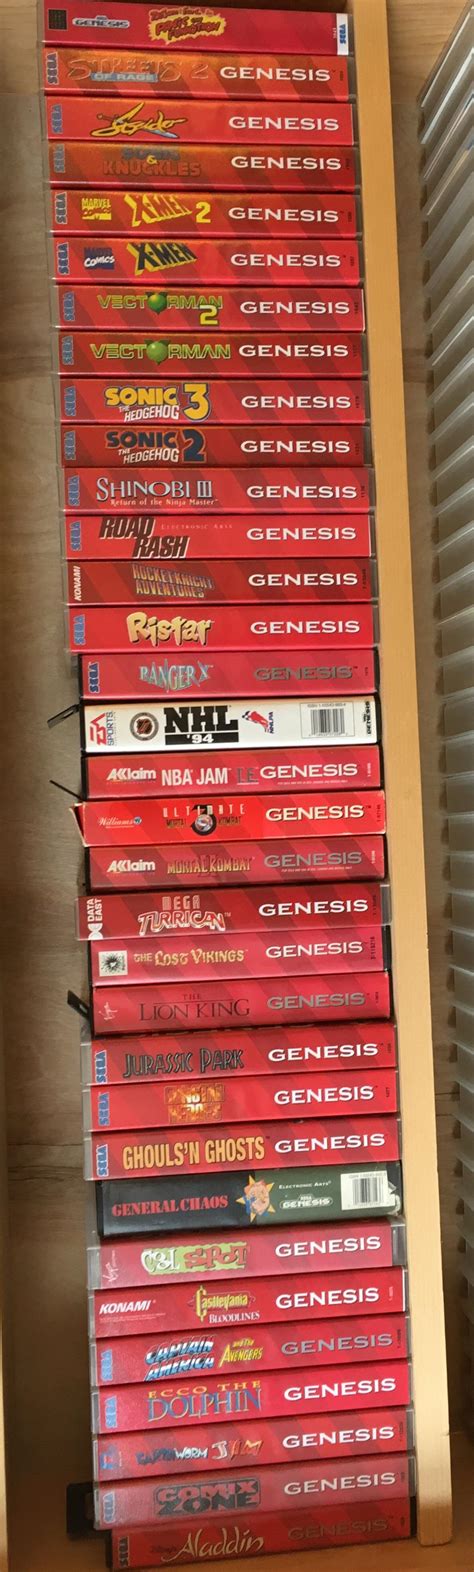 My Sega Genesis Collection What Am I Missing What Games Are Your